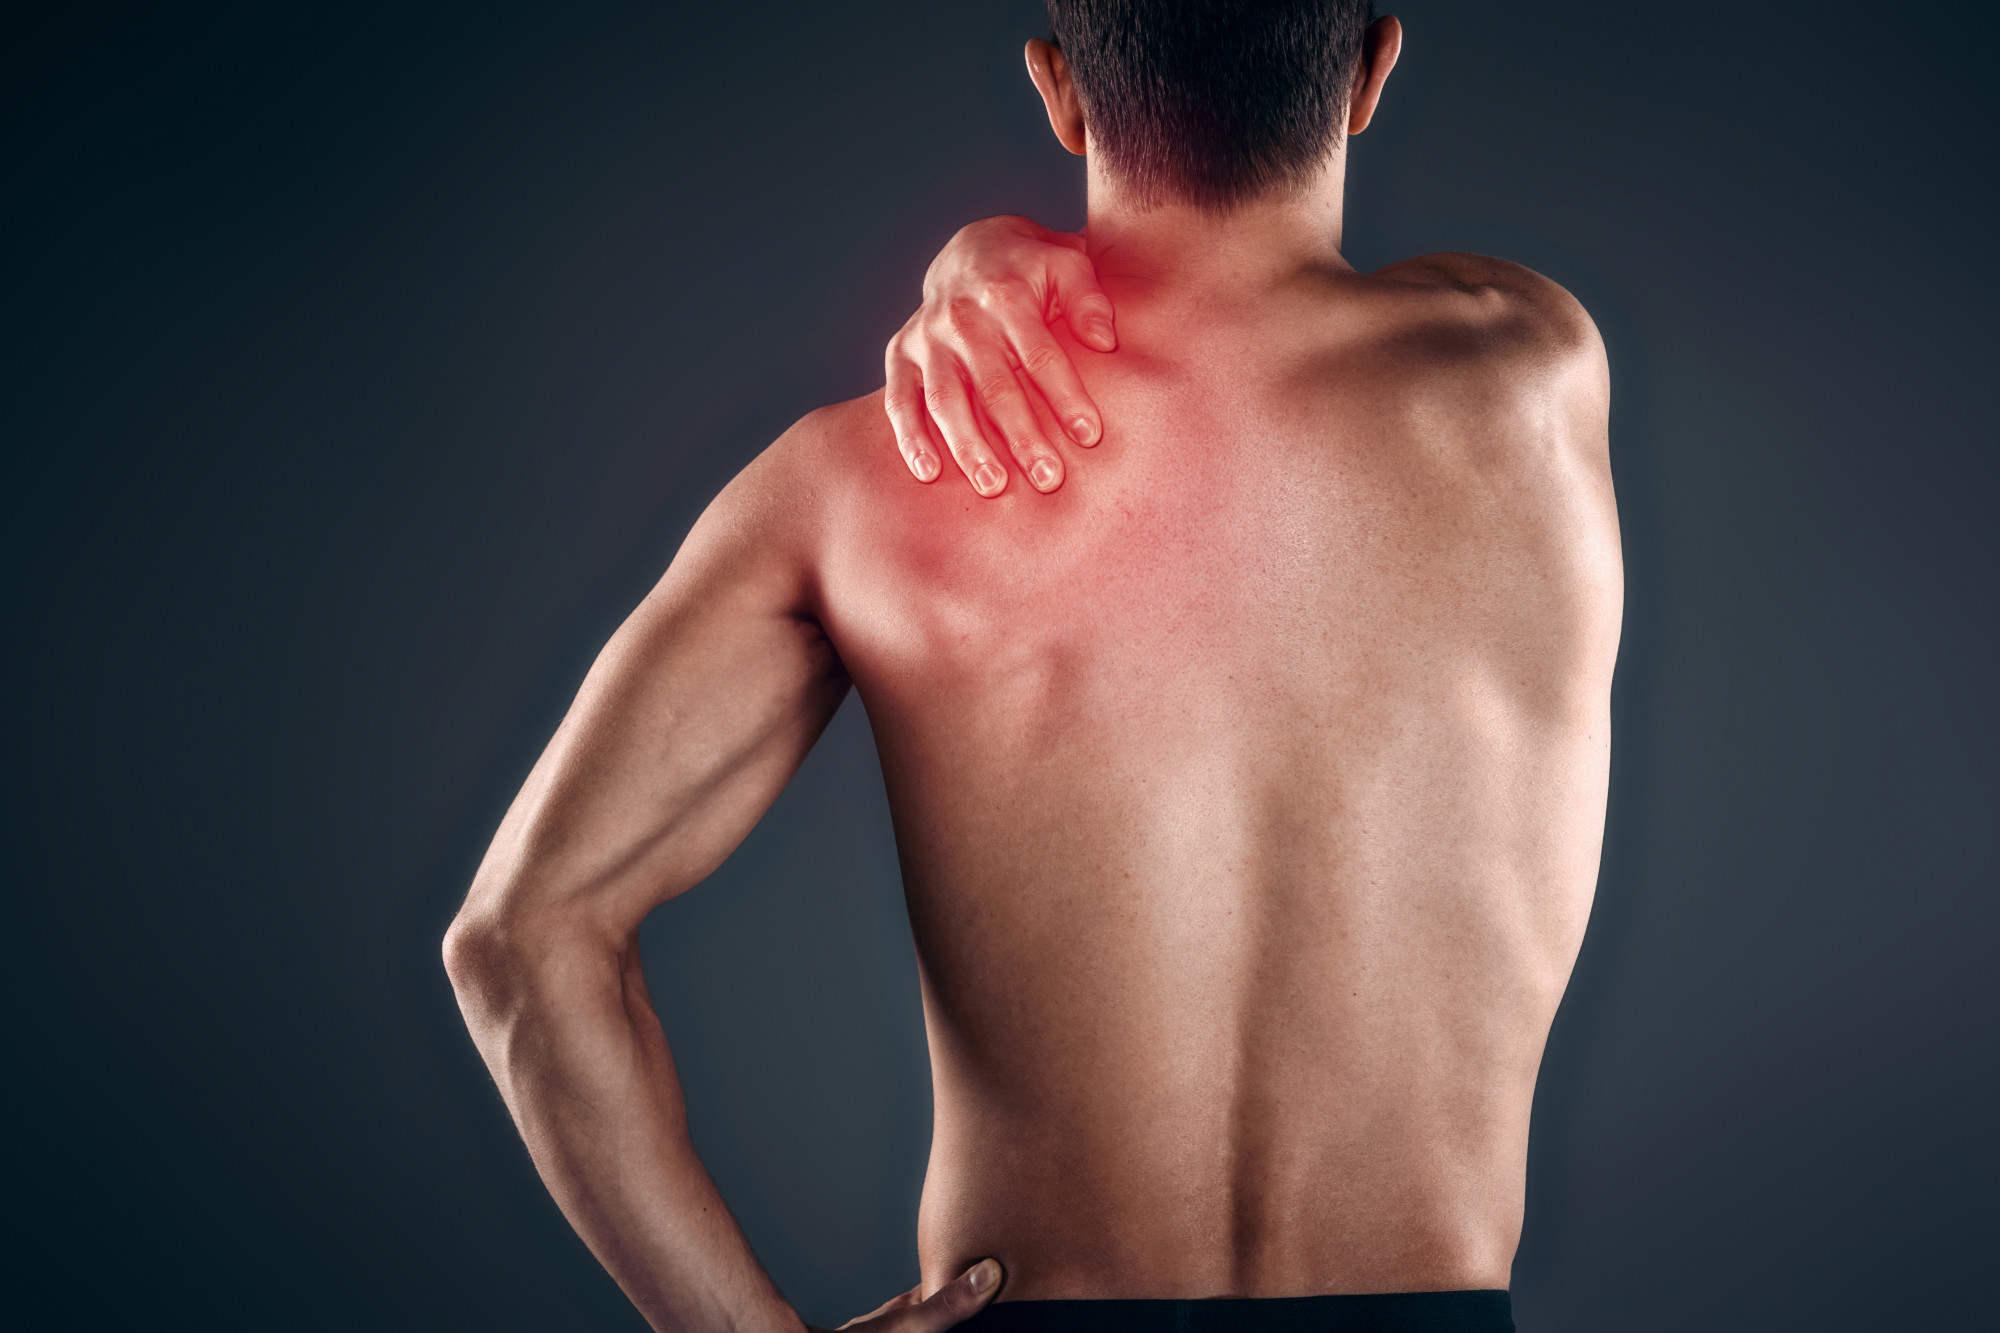 How Can a Chiropractor Help With Chronic Back Pain?